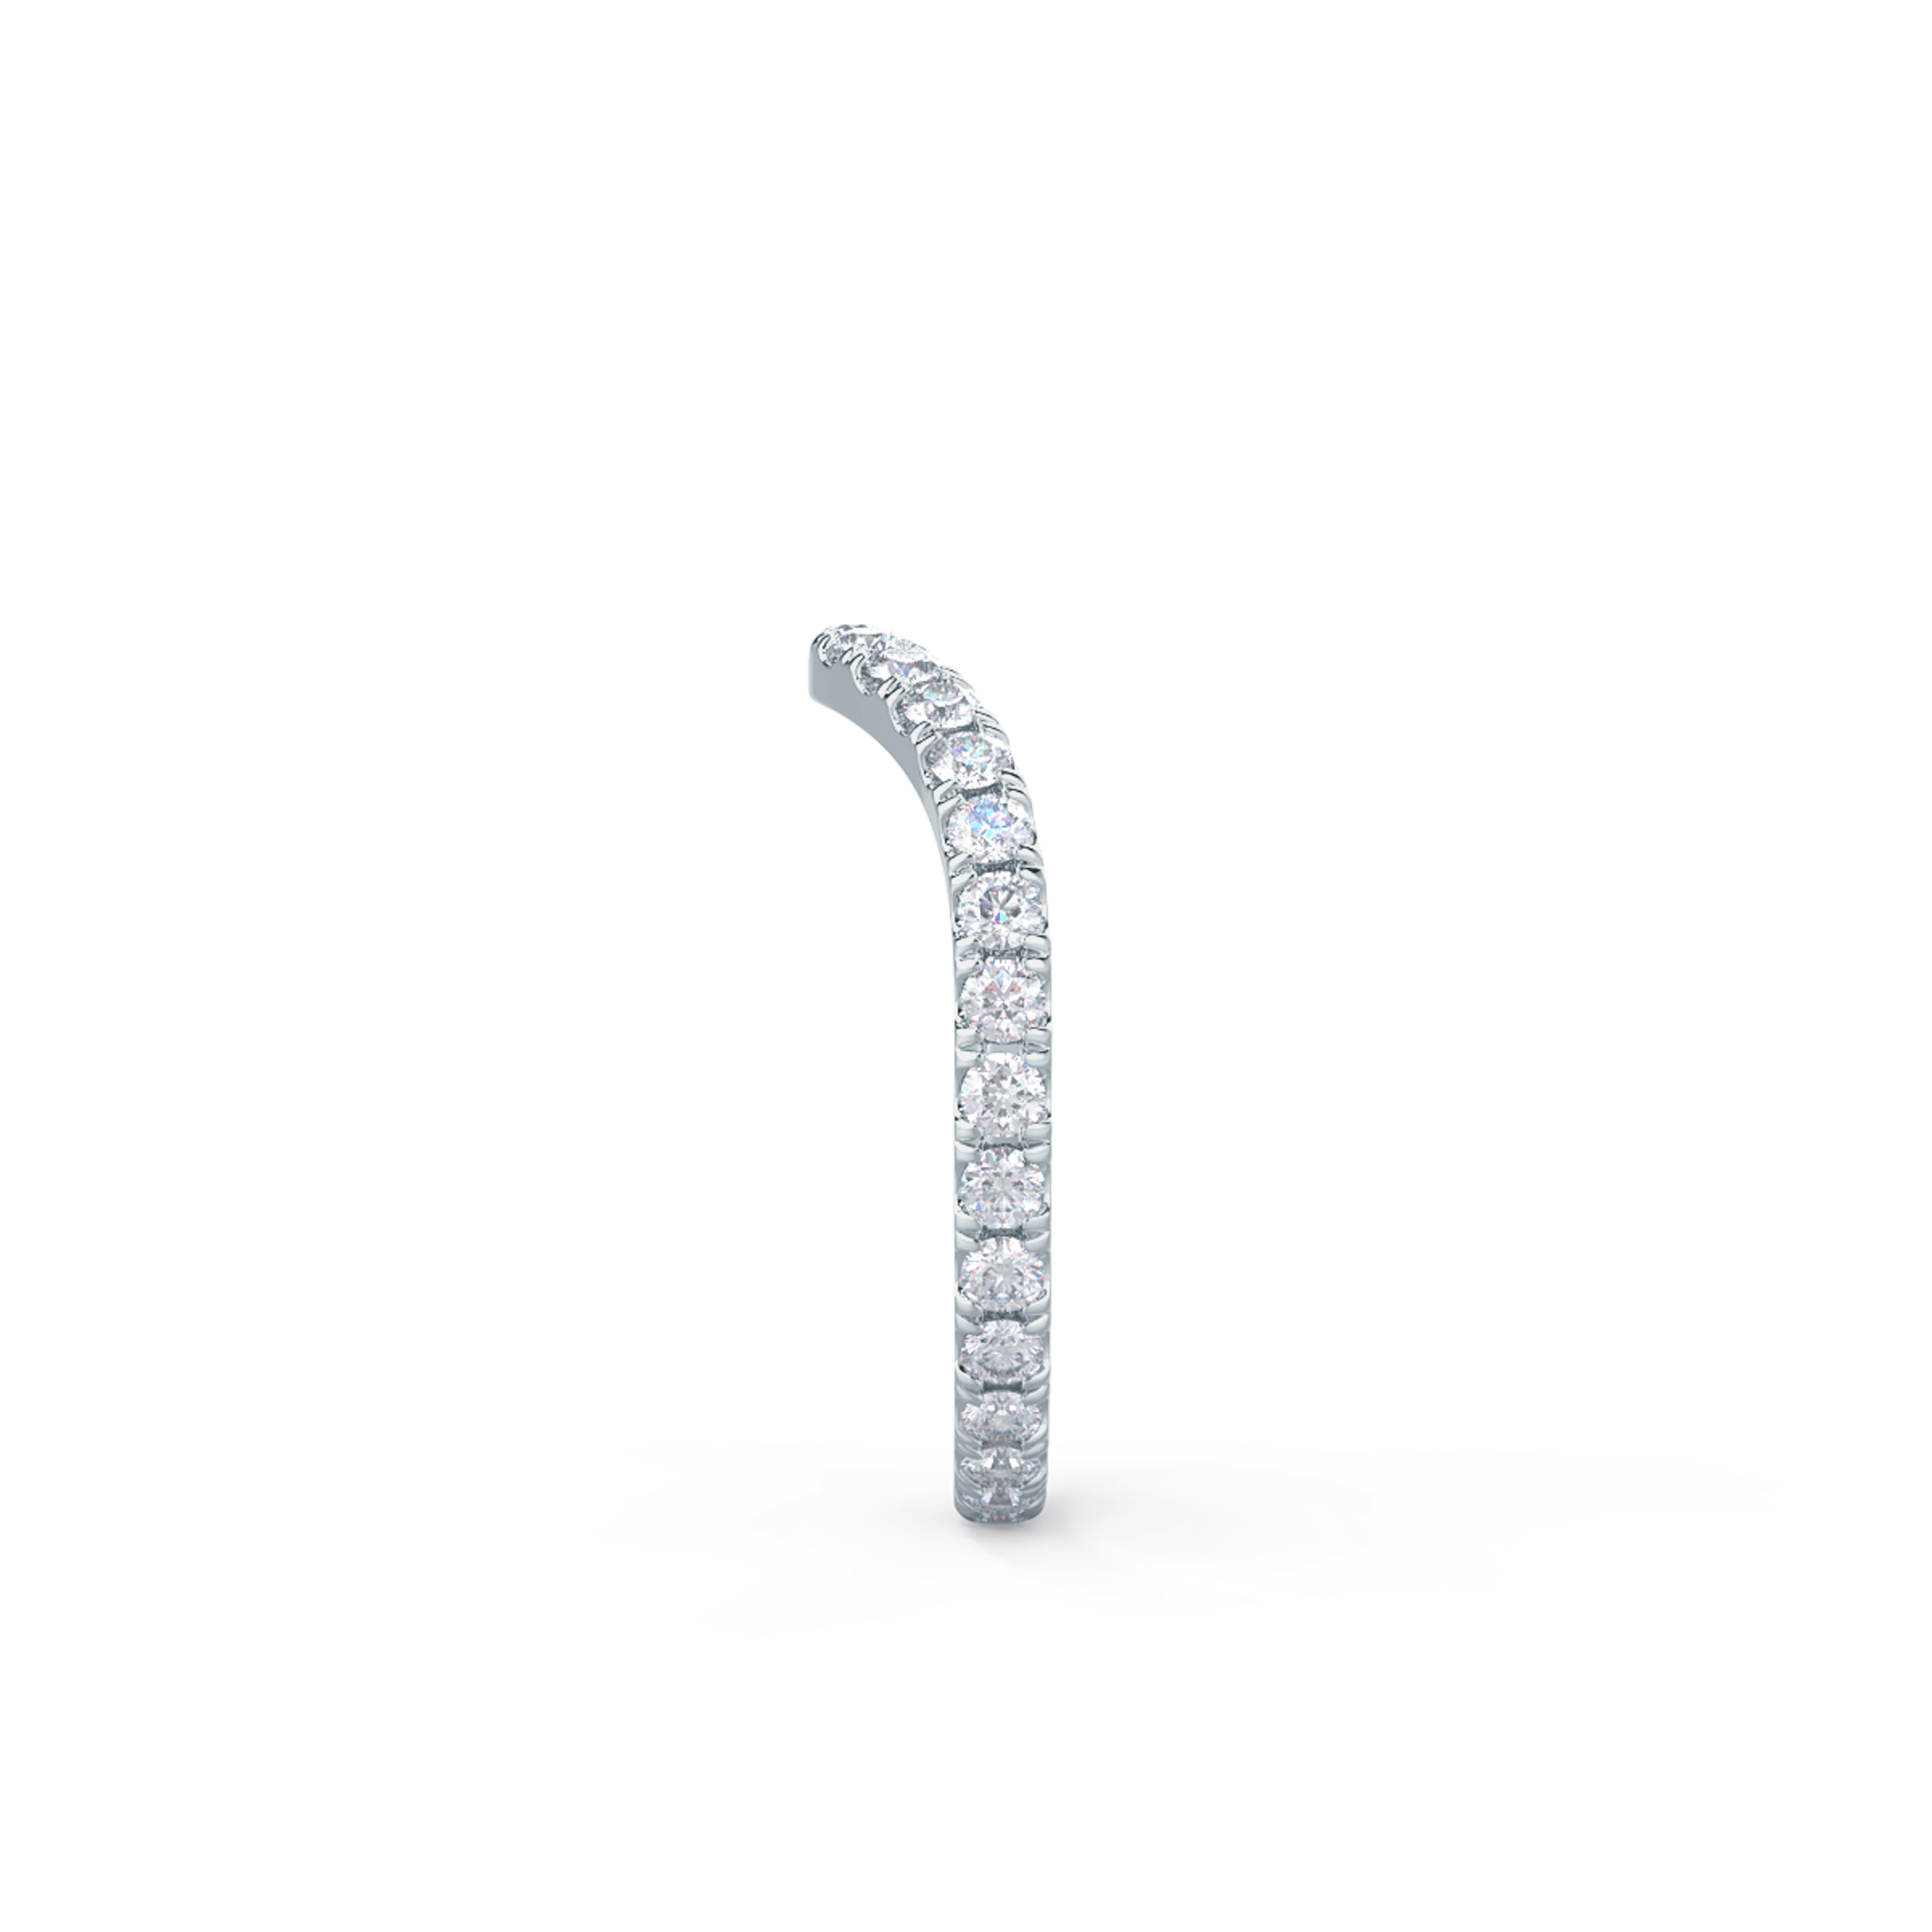 White Gold Pavé Contoured Eternity Band featuring 0.7 ct Round Brilliant Lab Diamonds (Side View)